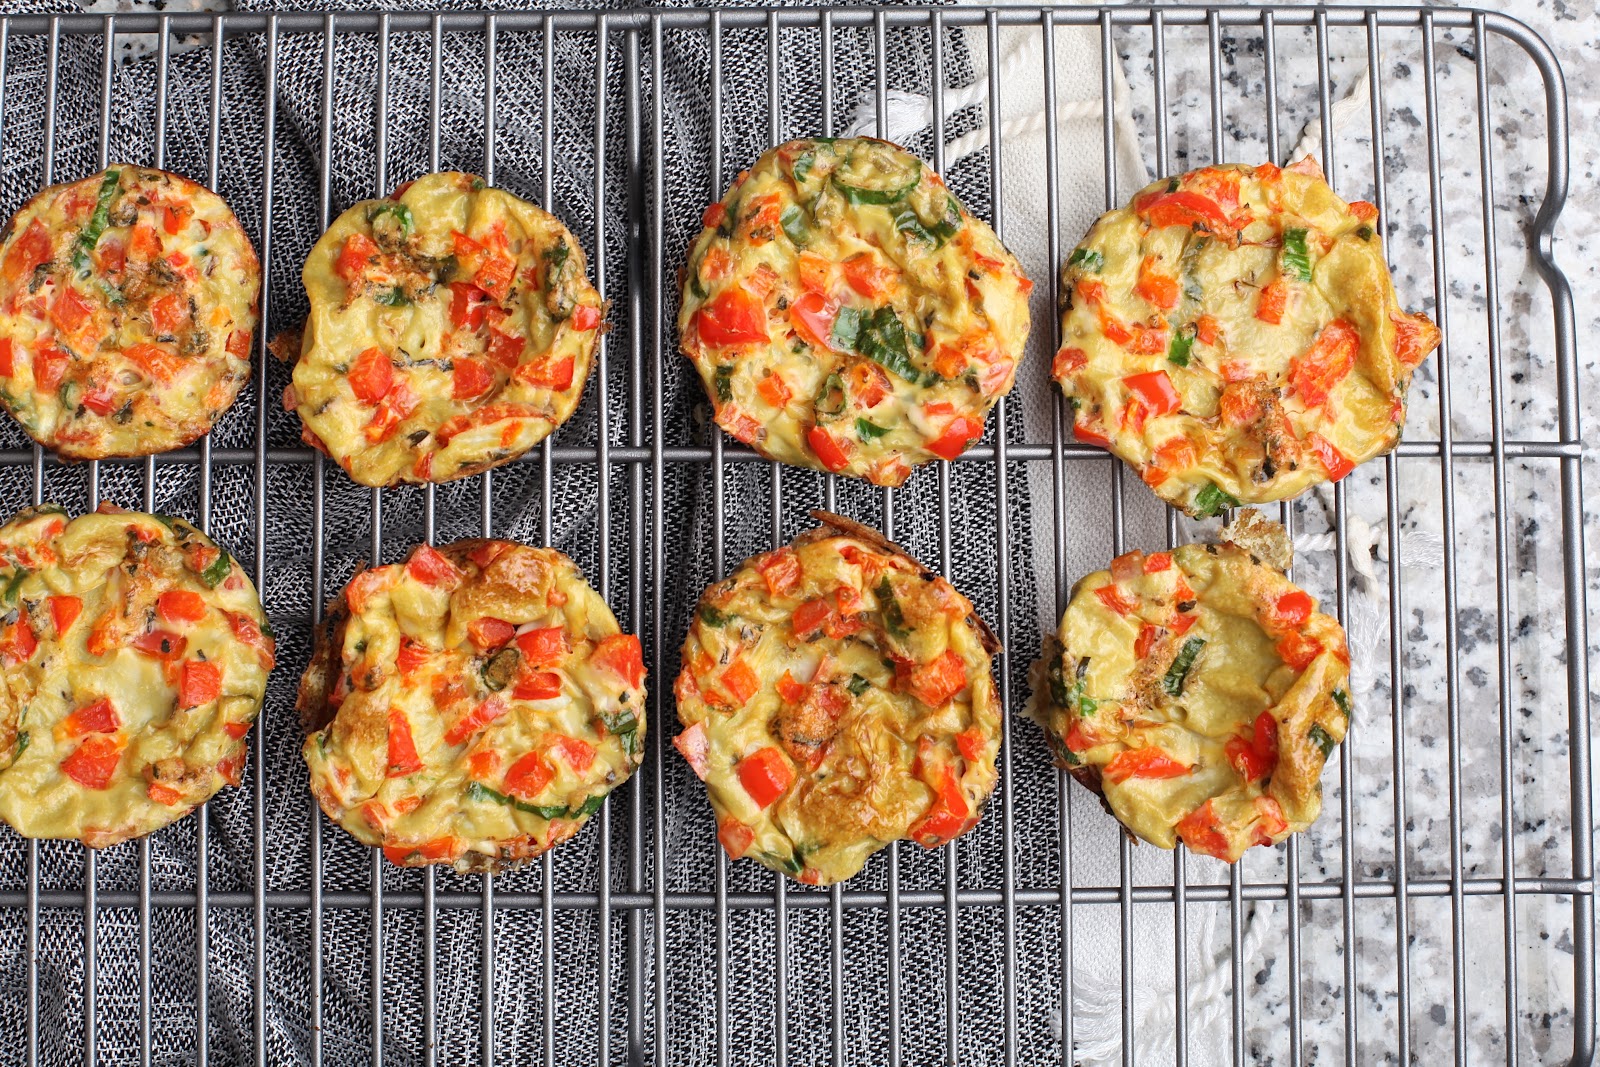 How to meal prep: Egg muffins on an oven rack